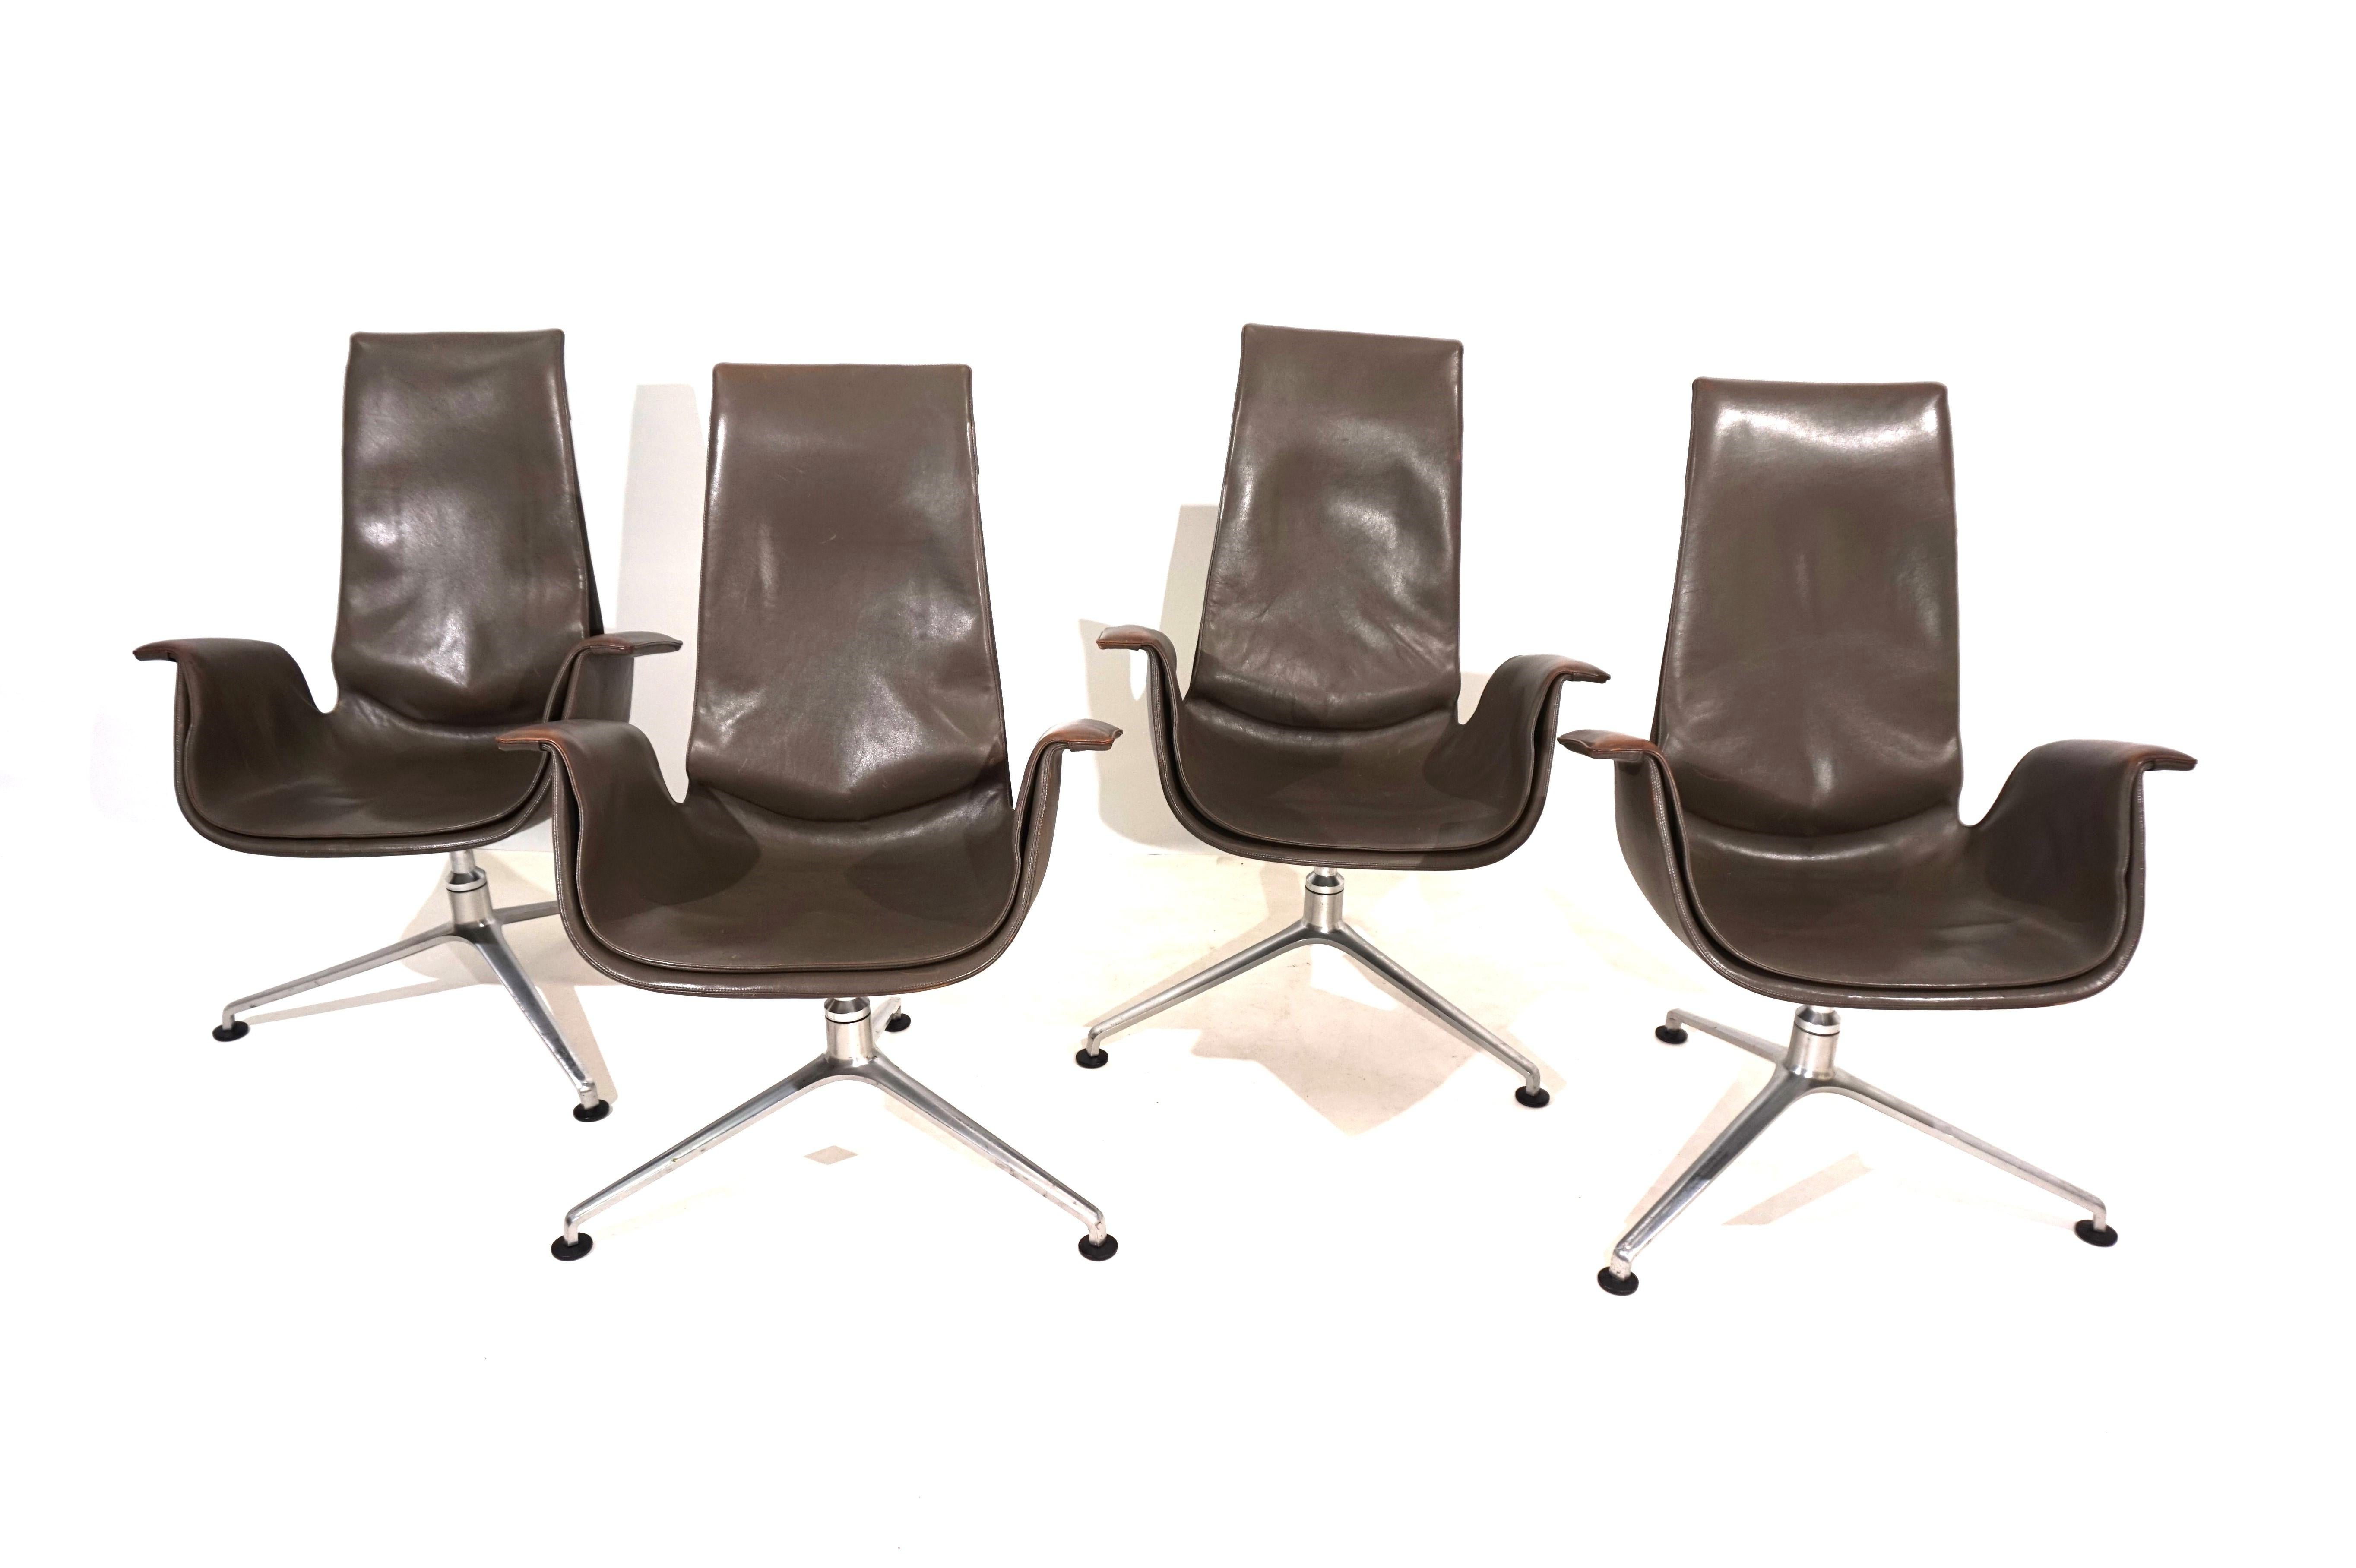 Set of 4 Kill International FK6725 leather chairs by Fabricius & Kastholm In Good Condition For Sale In Ludwigslust, DE